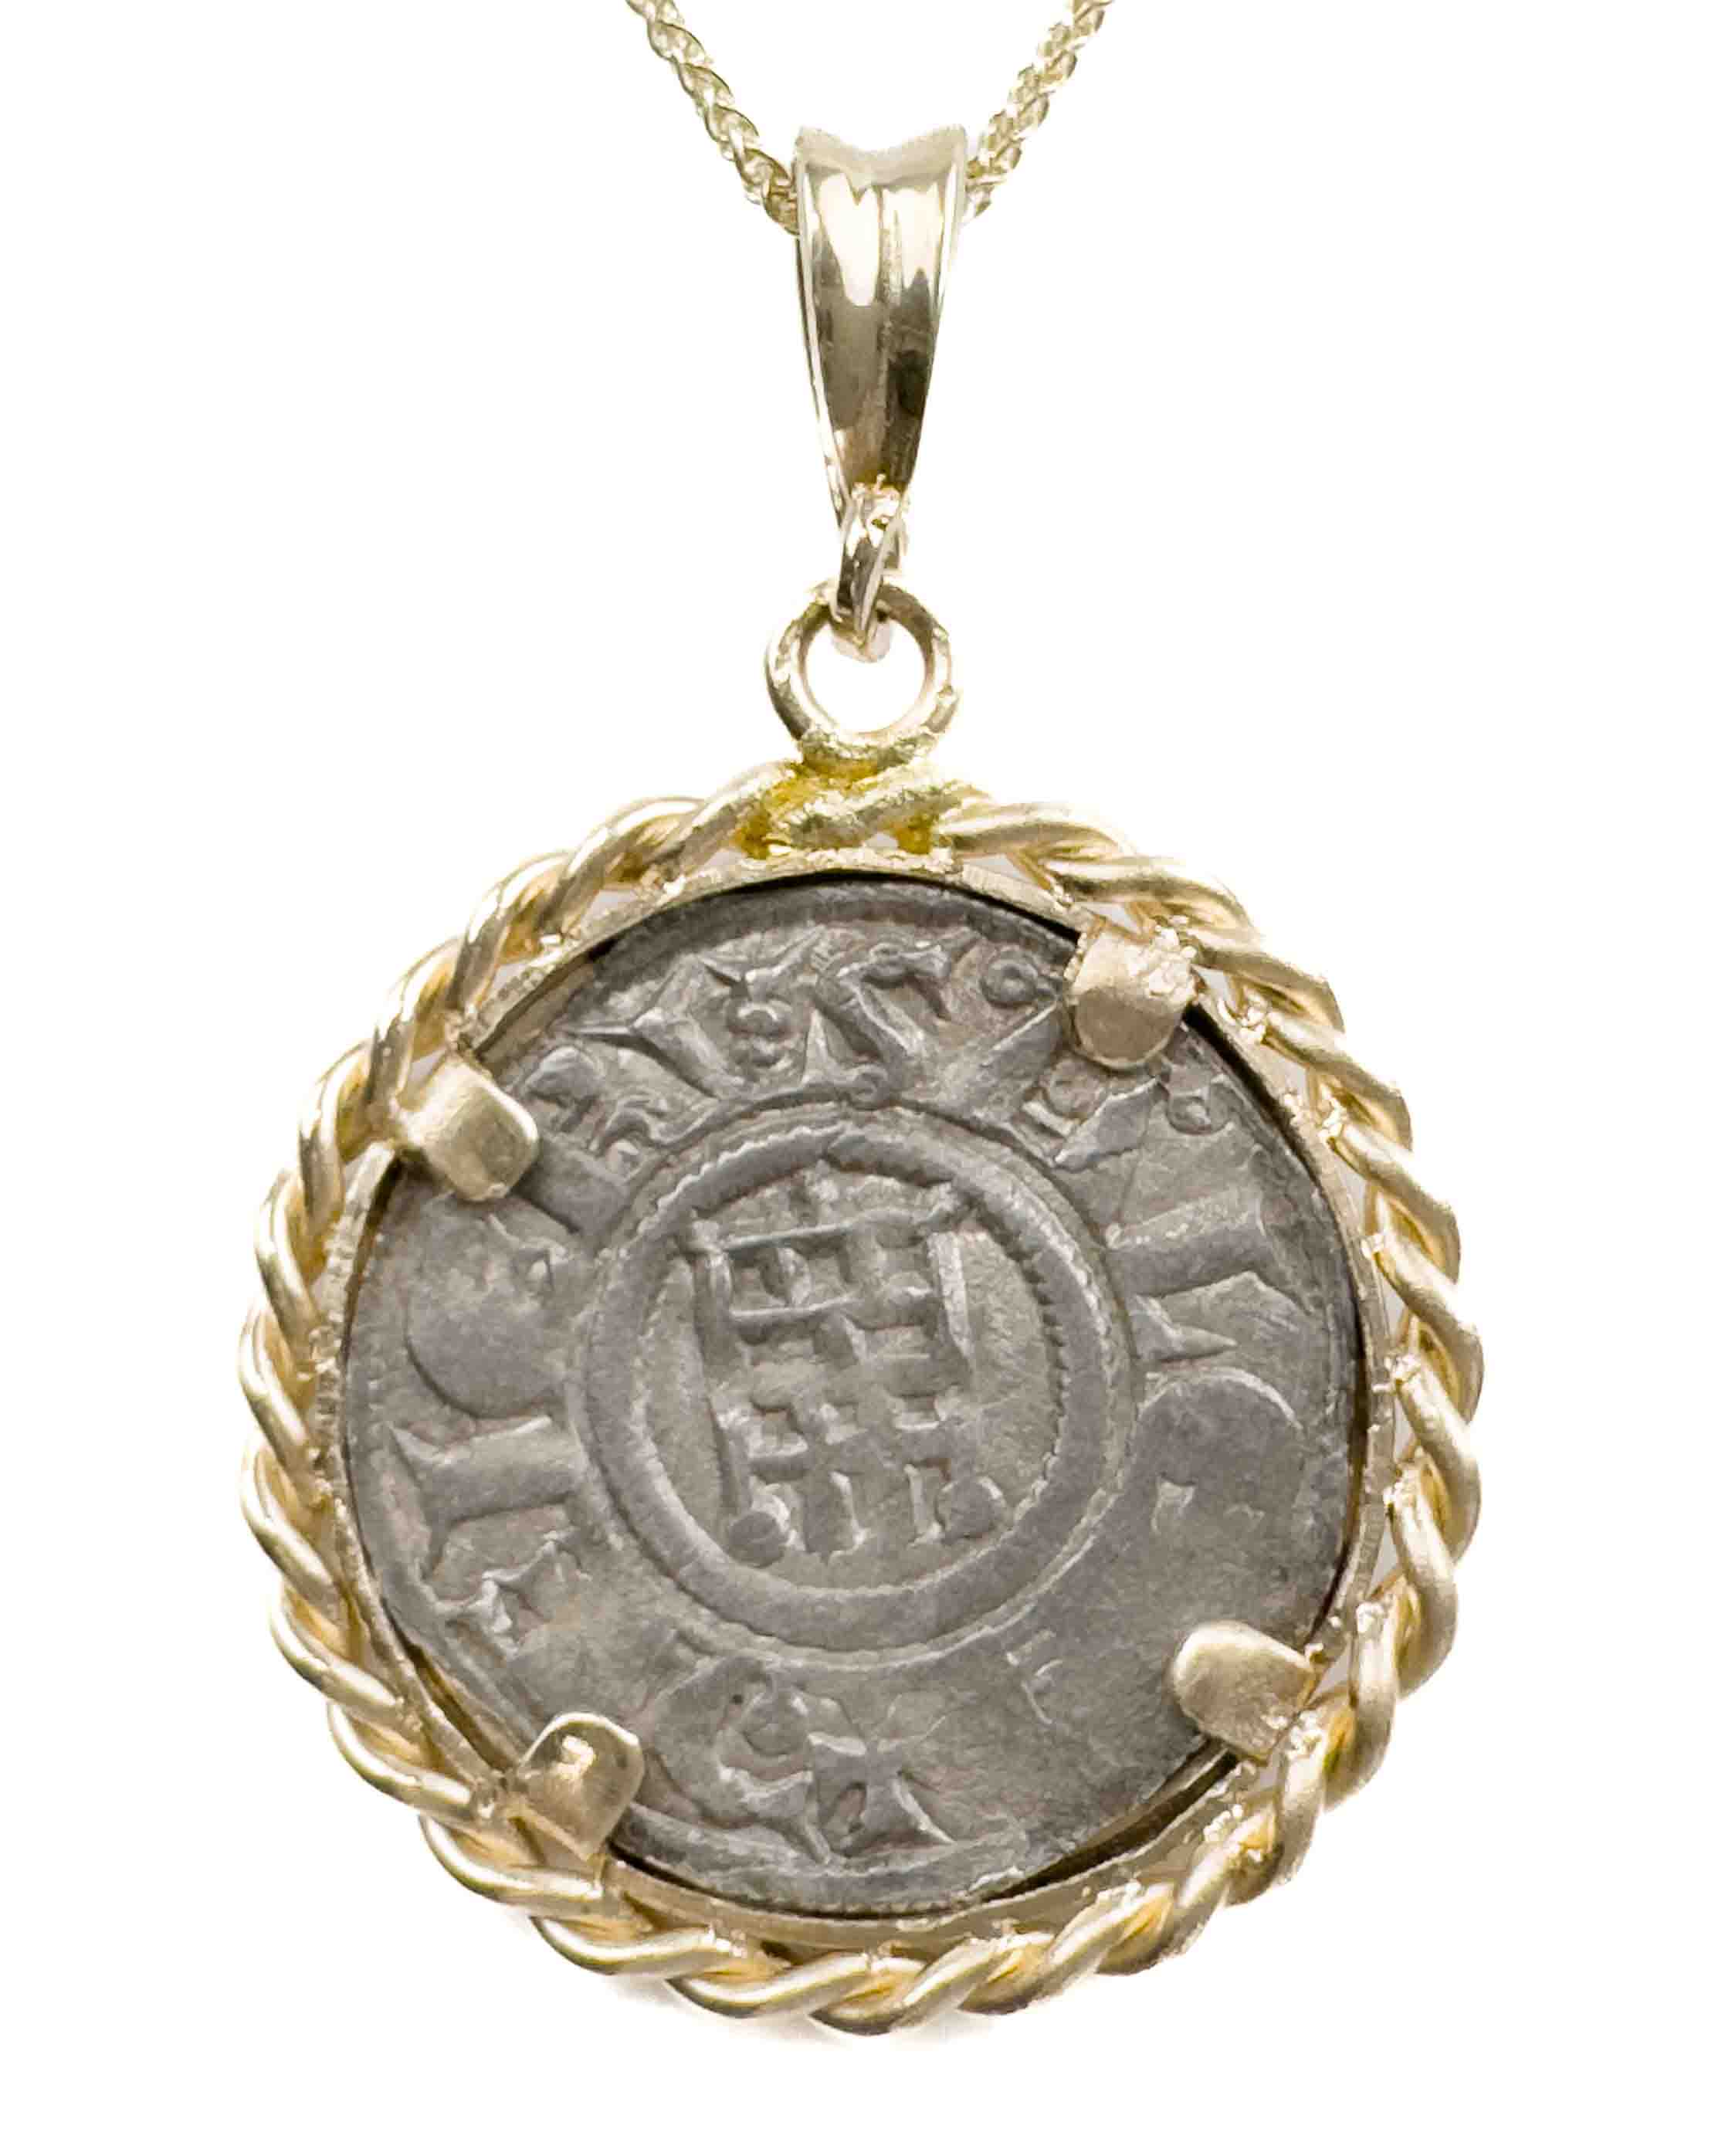 14k Gold Genuine Ancient Crusades Coin Necklace (Baldwin III, King of Jerusalem; 1143-1163 A.D.)